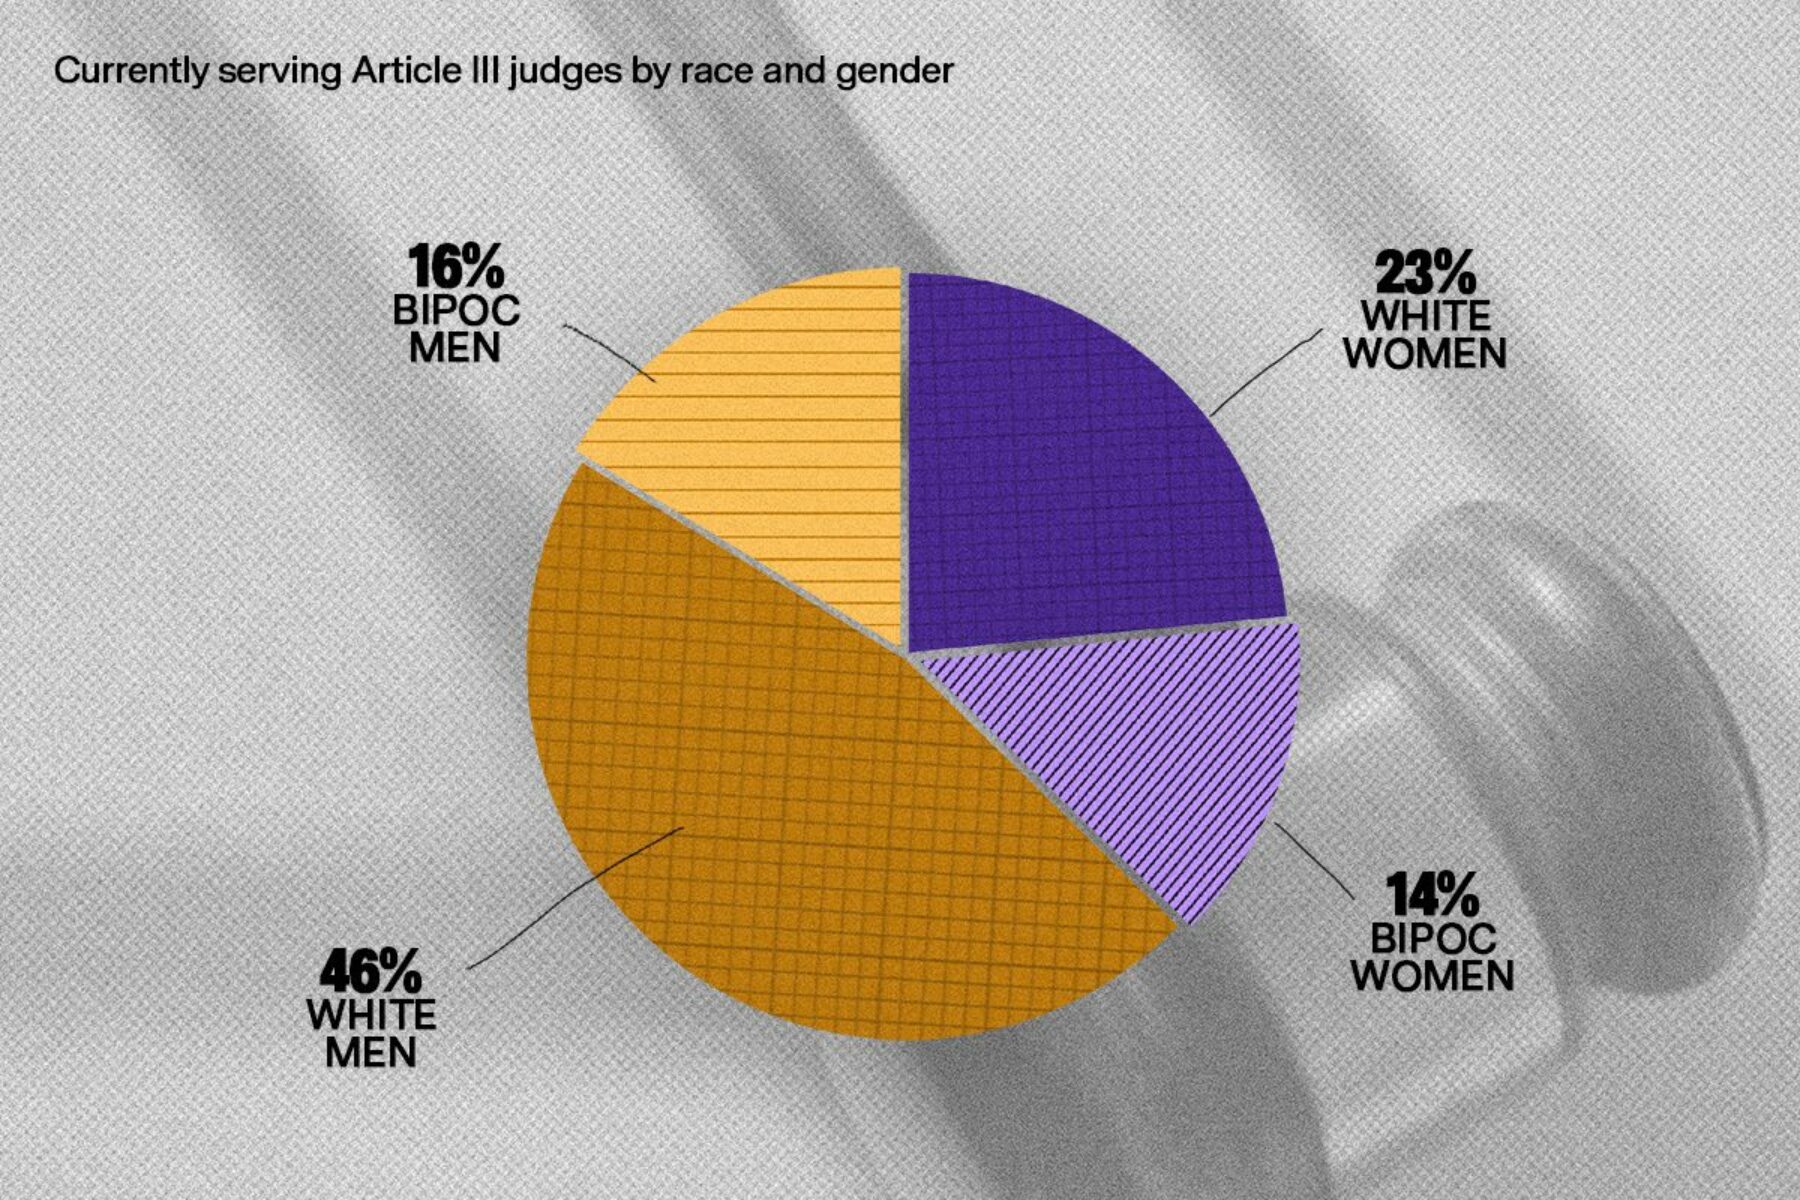 Graph of currently serving article III judges by race and gender: 46% White men, 23% White Women, 16% BIPOC men, 14% BIPOC Women.